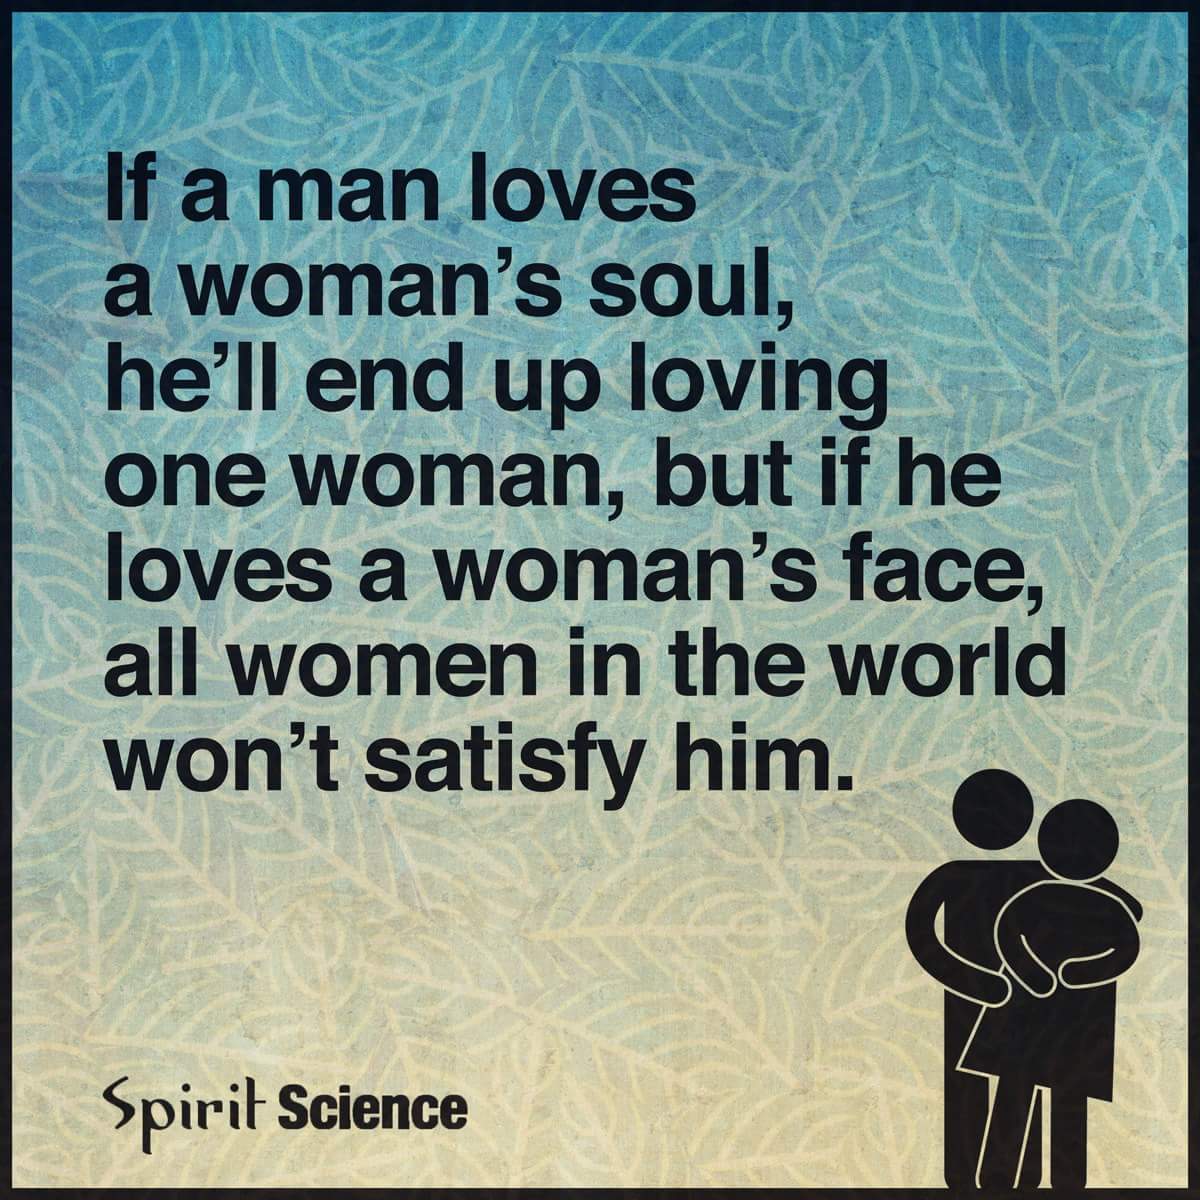 image “If a man loves a woman s